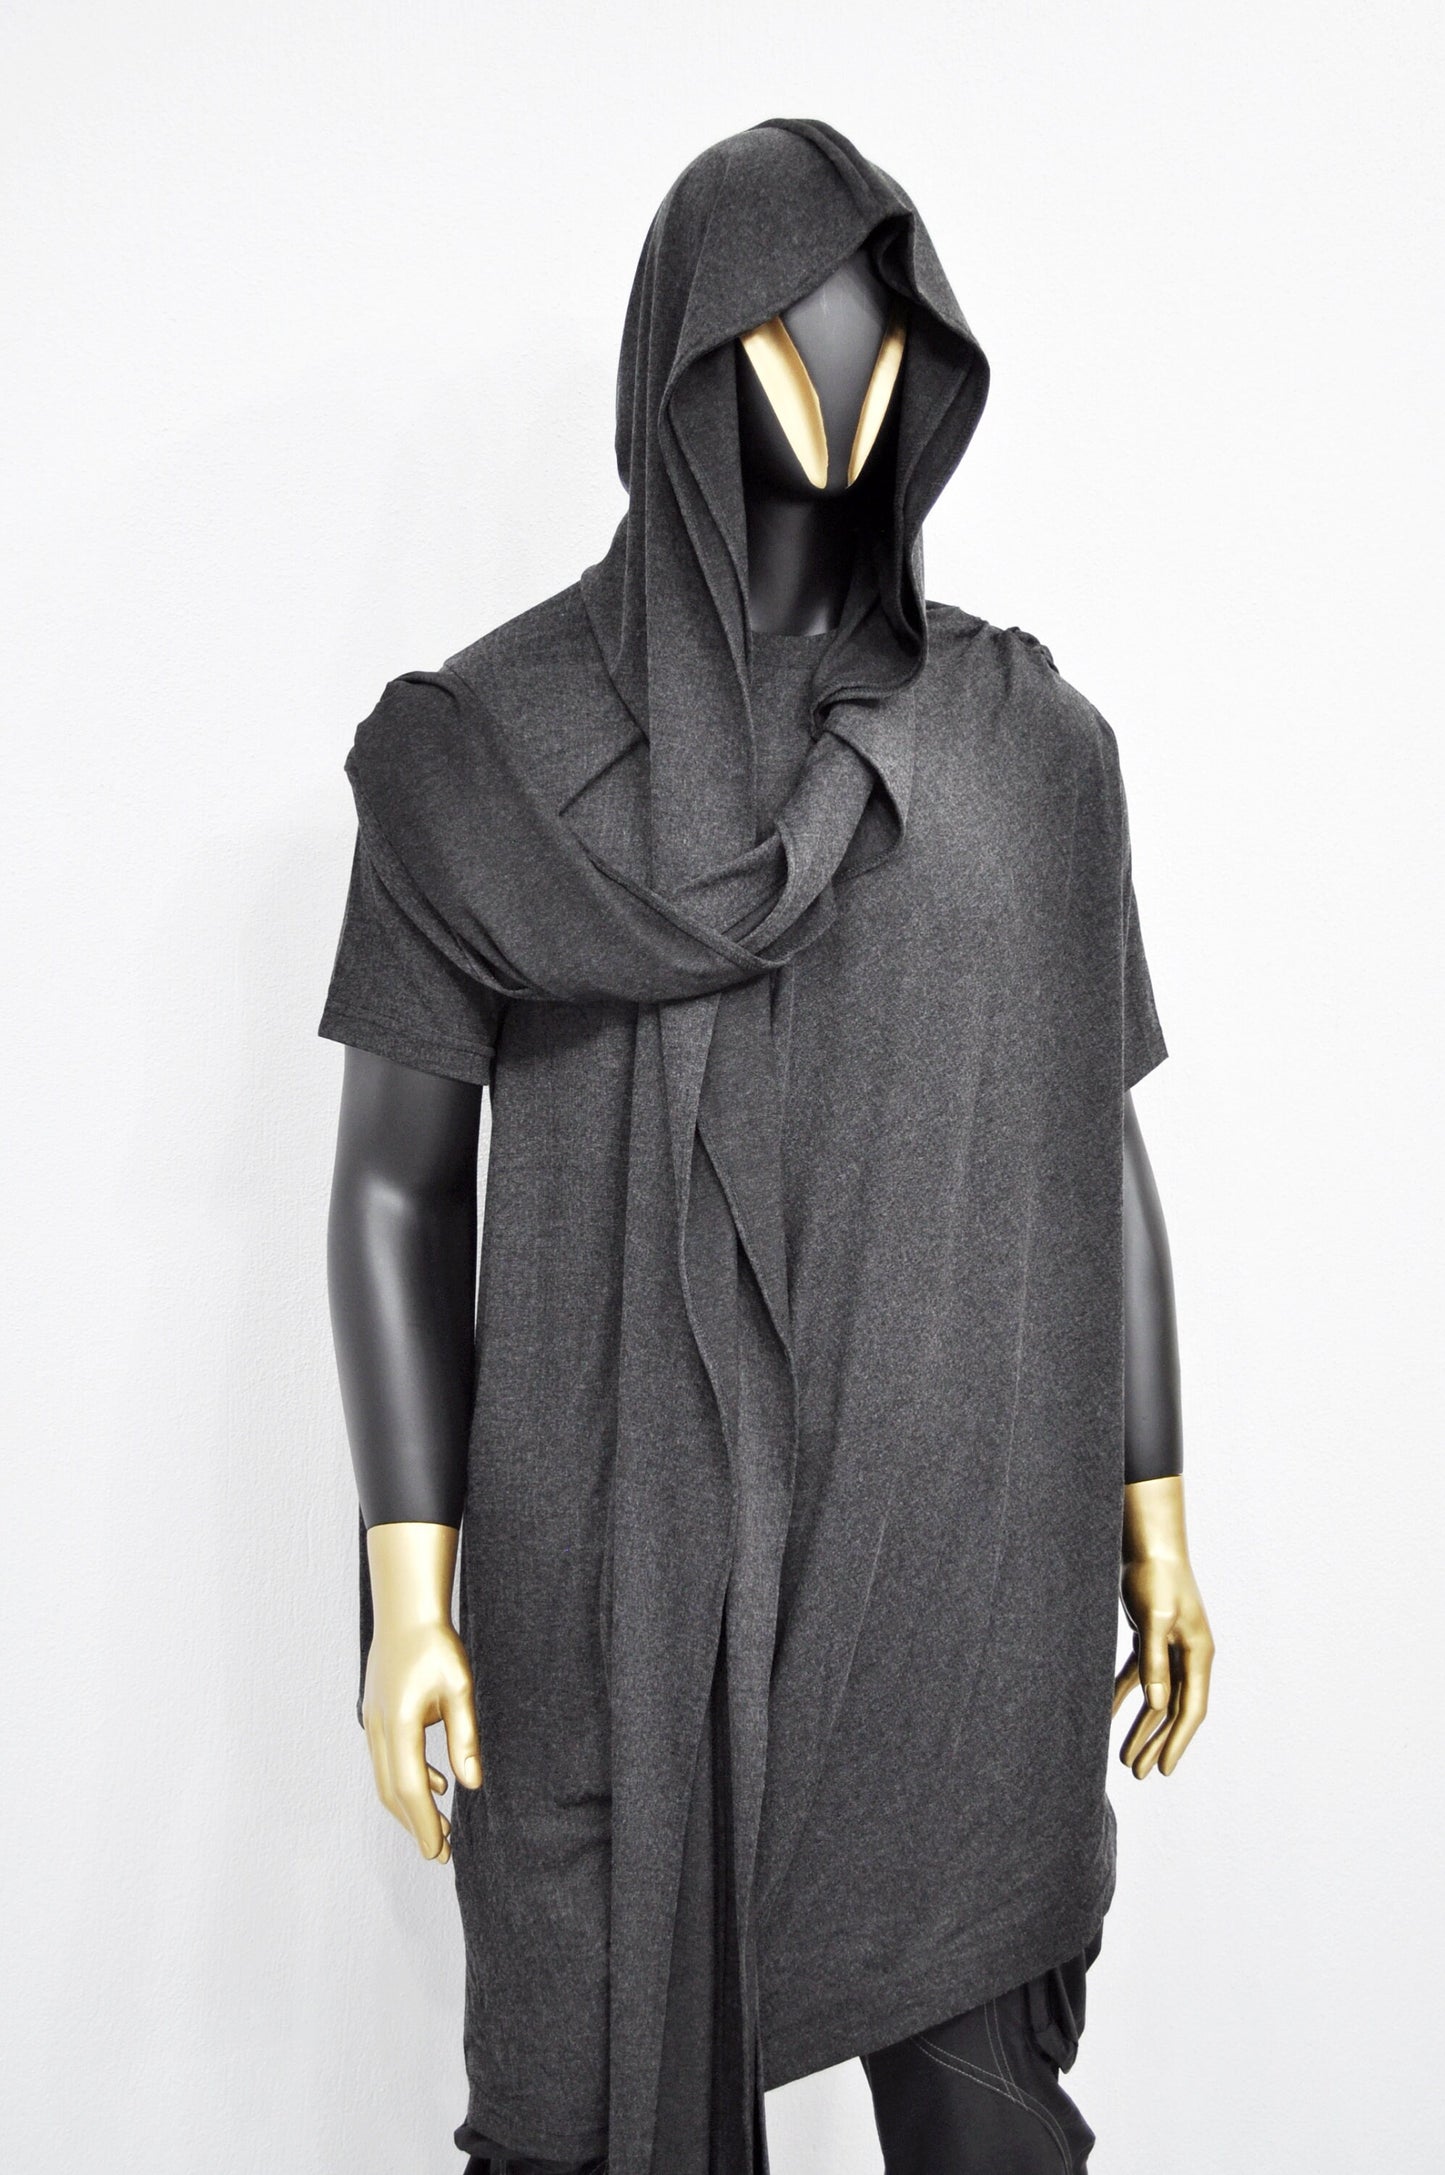 Adult Extra LONG Scarf,Gray Cowl Shawl Hooded Mens,Wrap Giant Hood,Oversized Blanket Scarf,Creed,Cyber SteamPunk Cosplay,Apocalyptic-BB0153